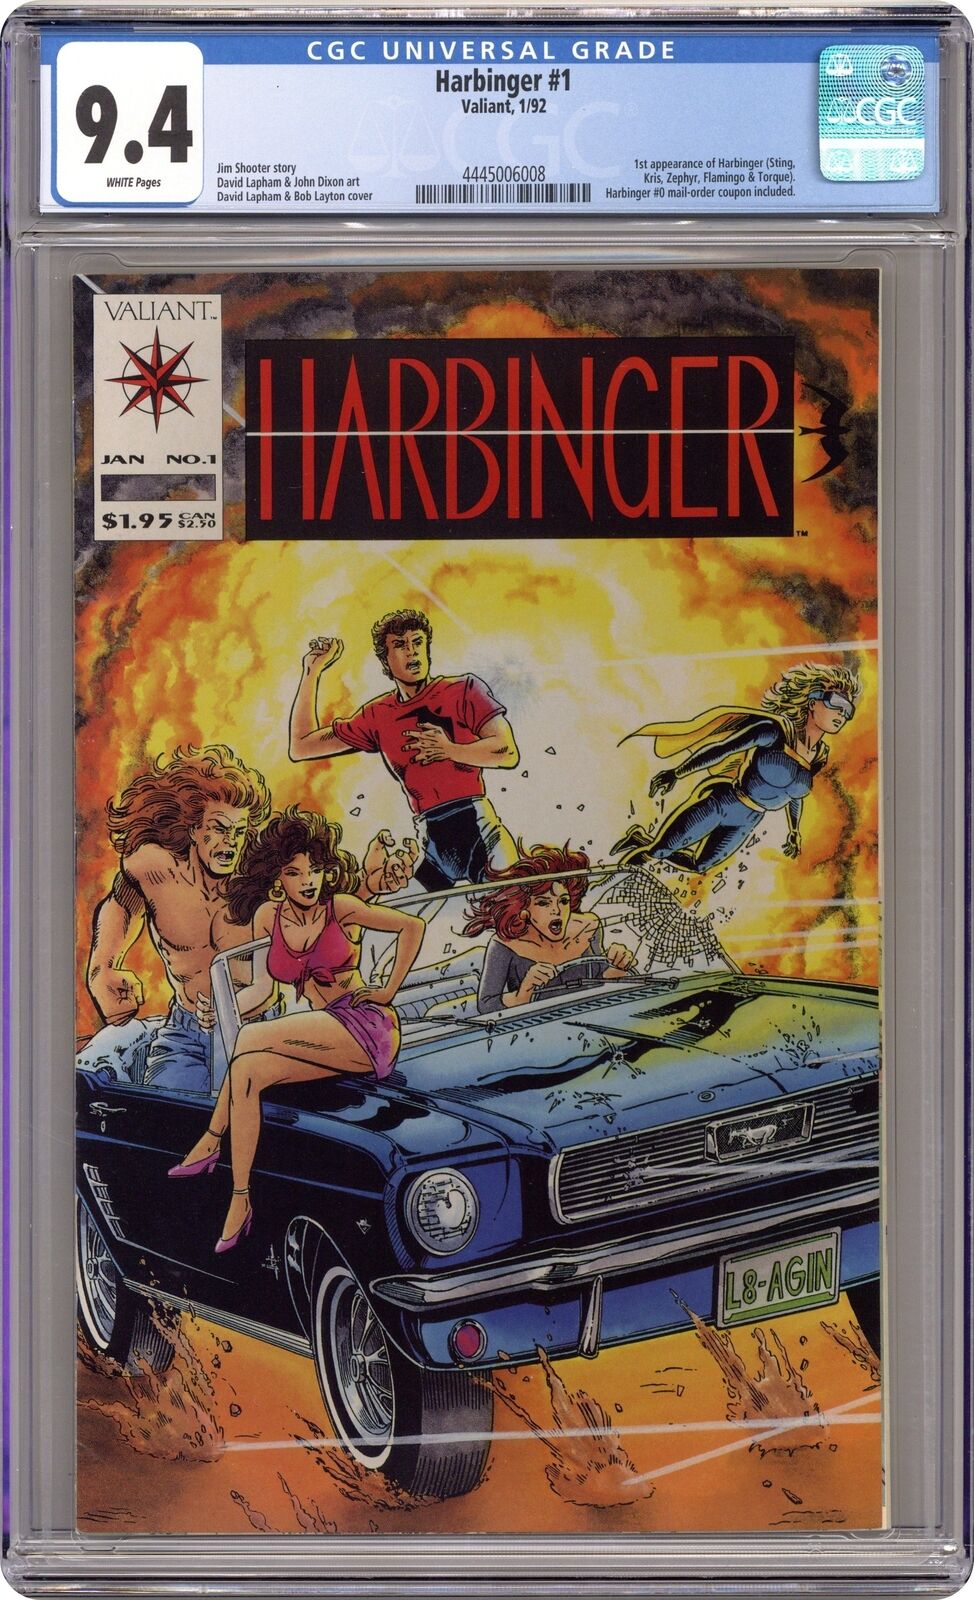 Harbinger 1D Coup. Included CGC 9.4 1992 4445006008